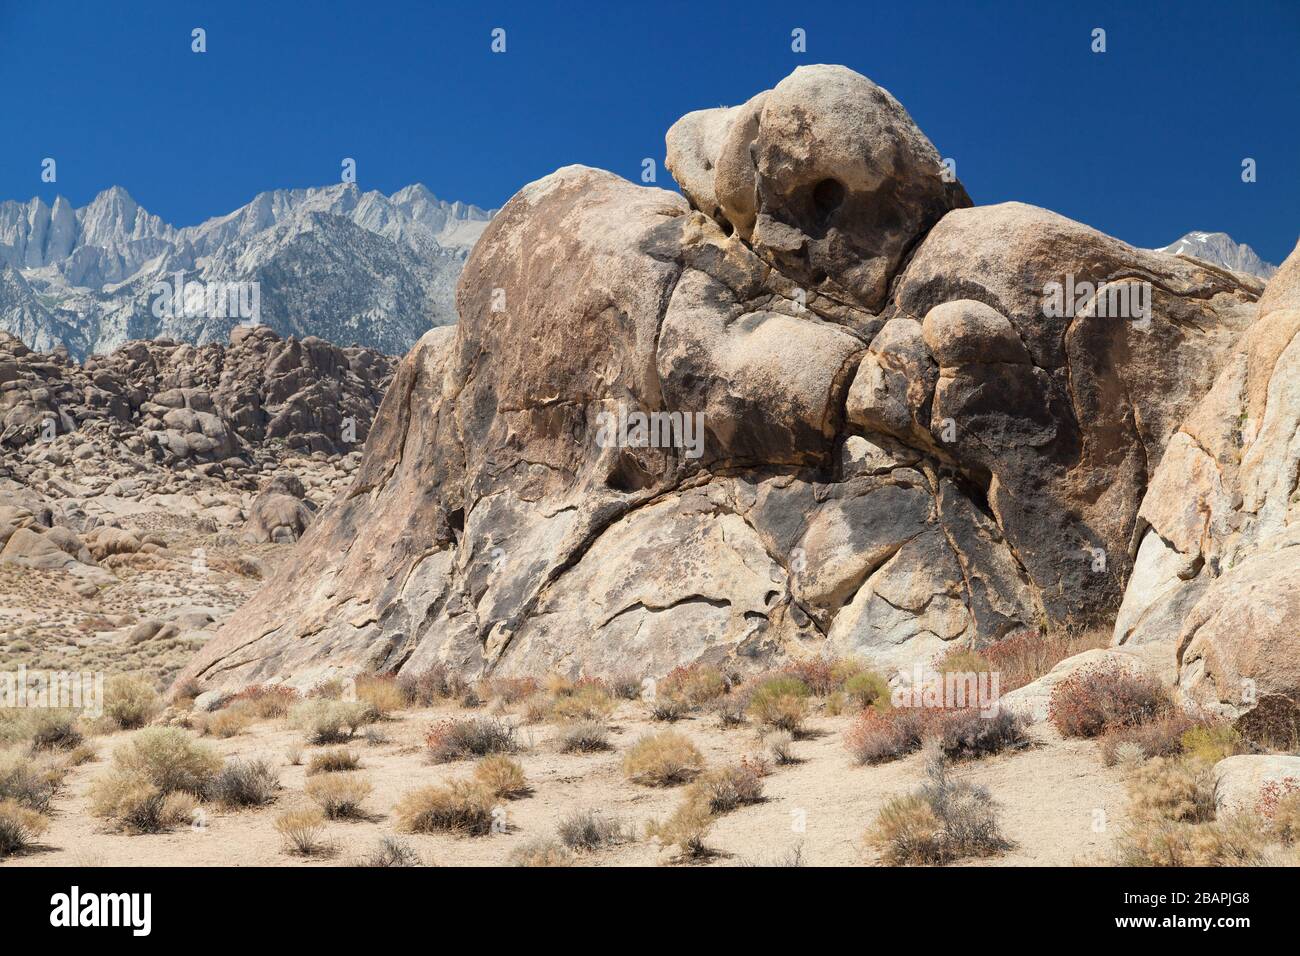 Huge boulder of Alabama Hills with the Mount Whitney in the background, Lone Pine, California, United States. Stock Photo